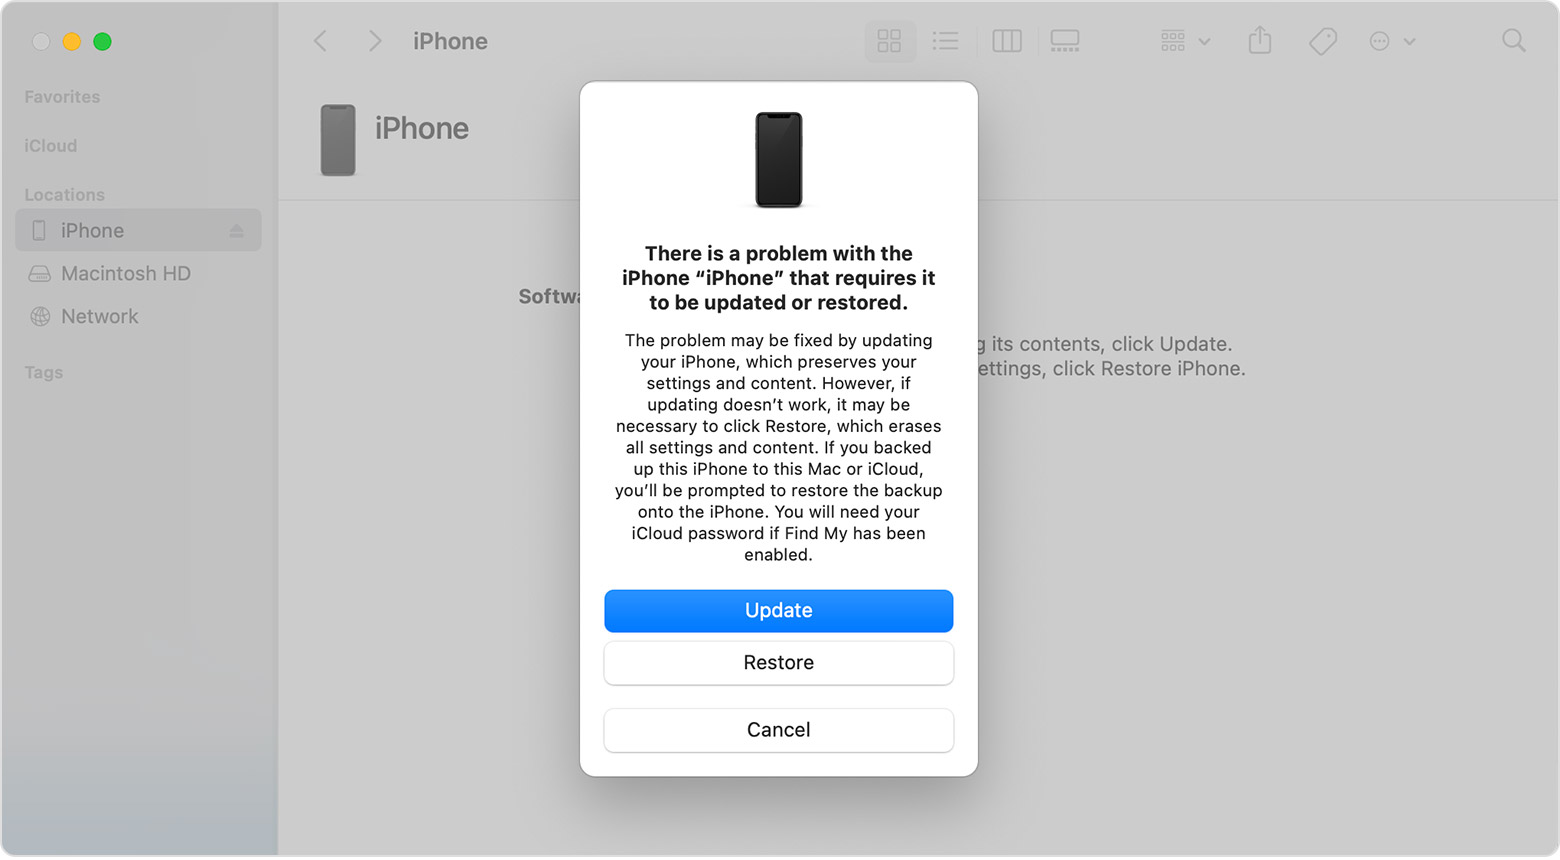 Apple.com warning message displaying how to unlock iPhone 7 without passcode or computer and core update.